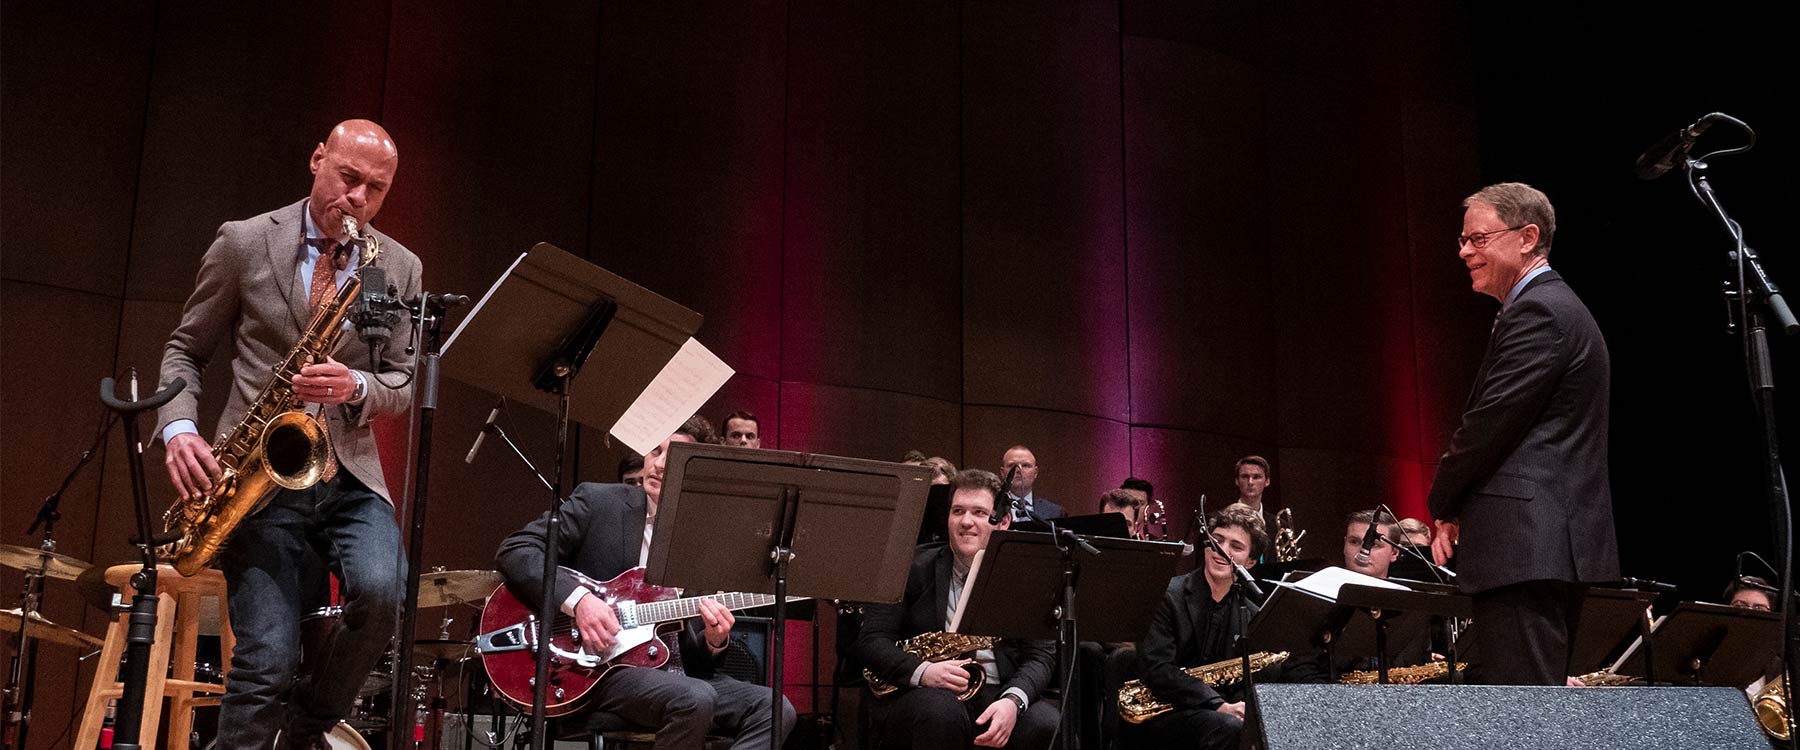 Joshua Redman performing with students and band director smiling, wide-eyed.